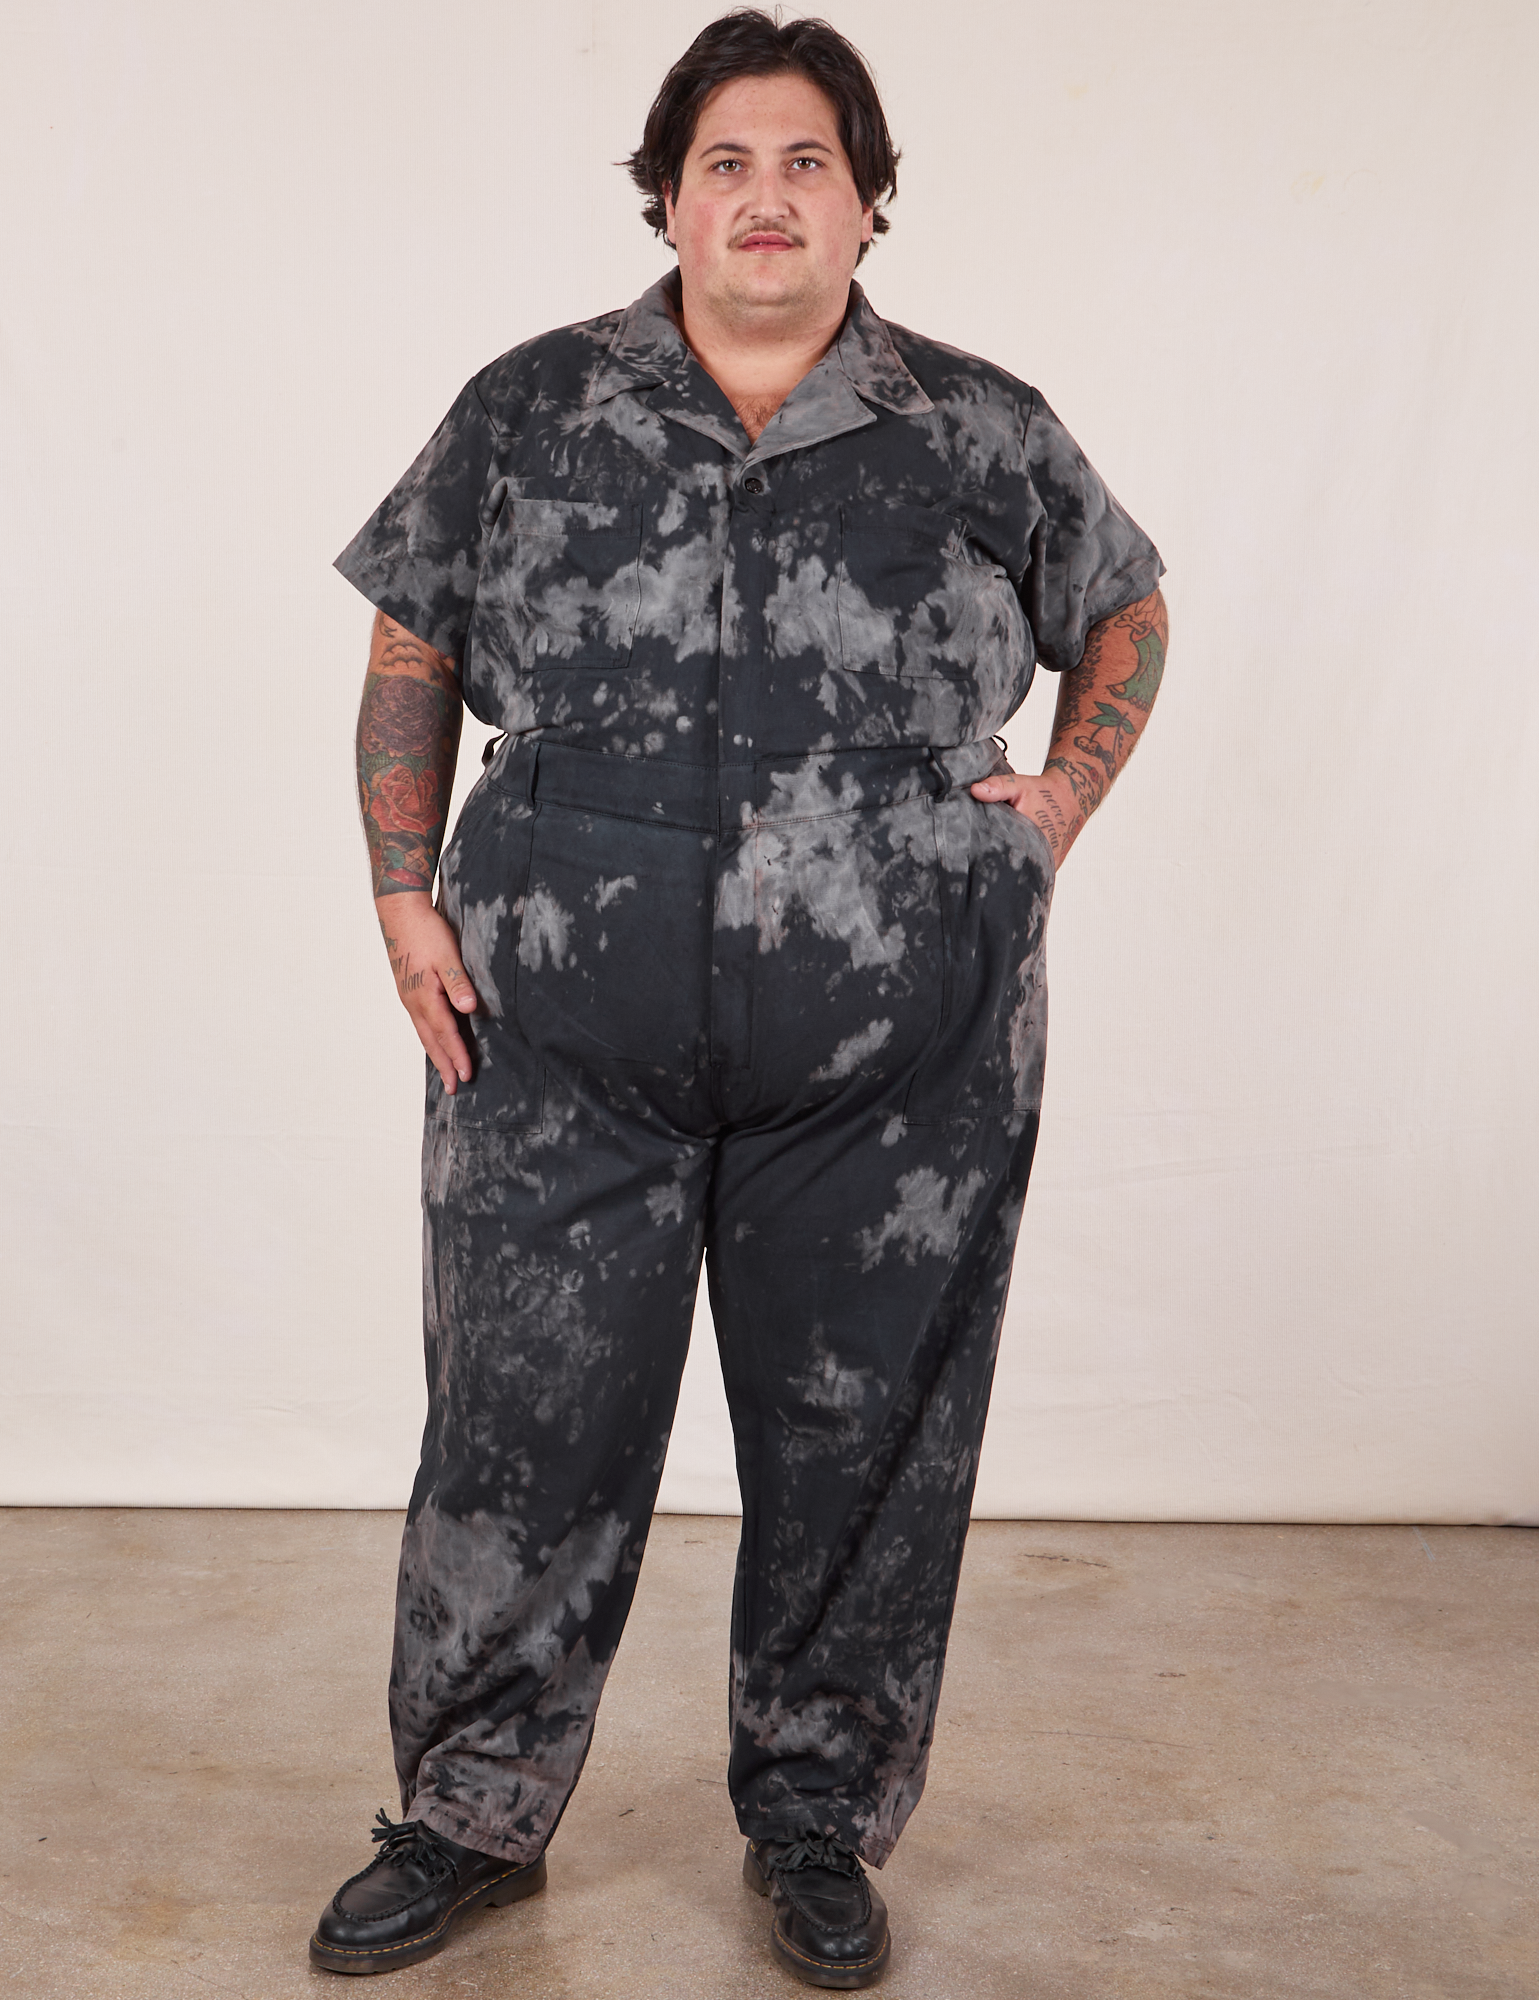 Sam is 5'10" and wearing 3XL Short Sleeve Jumpsuit in Black Magic Waters